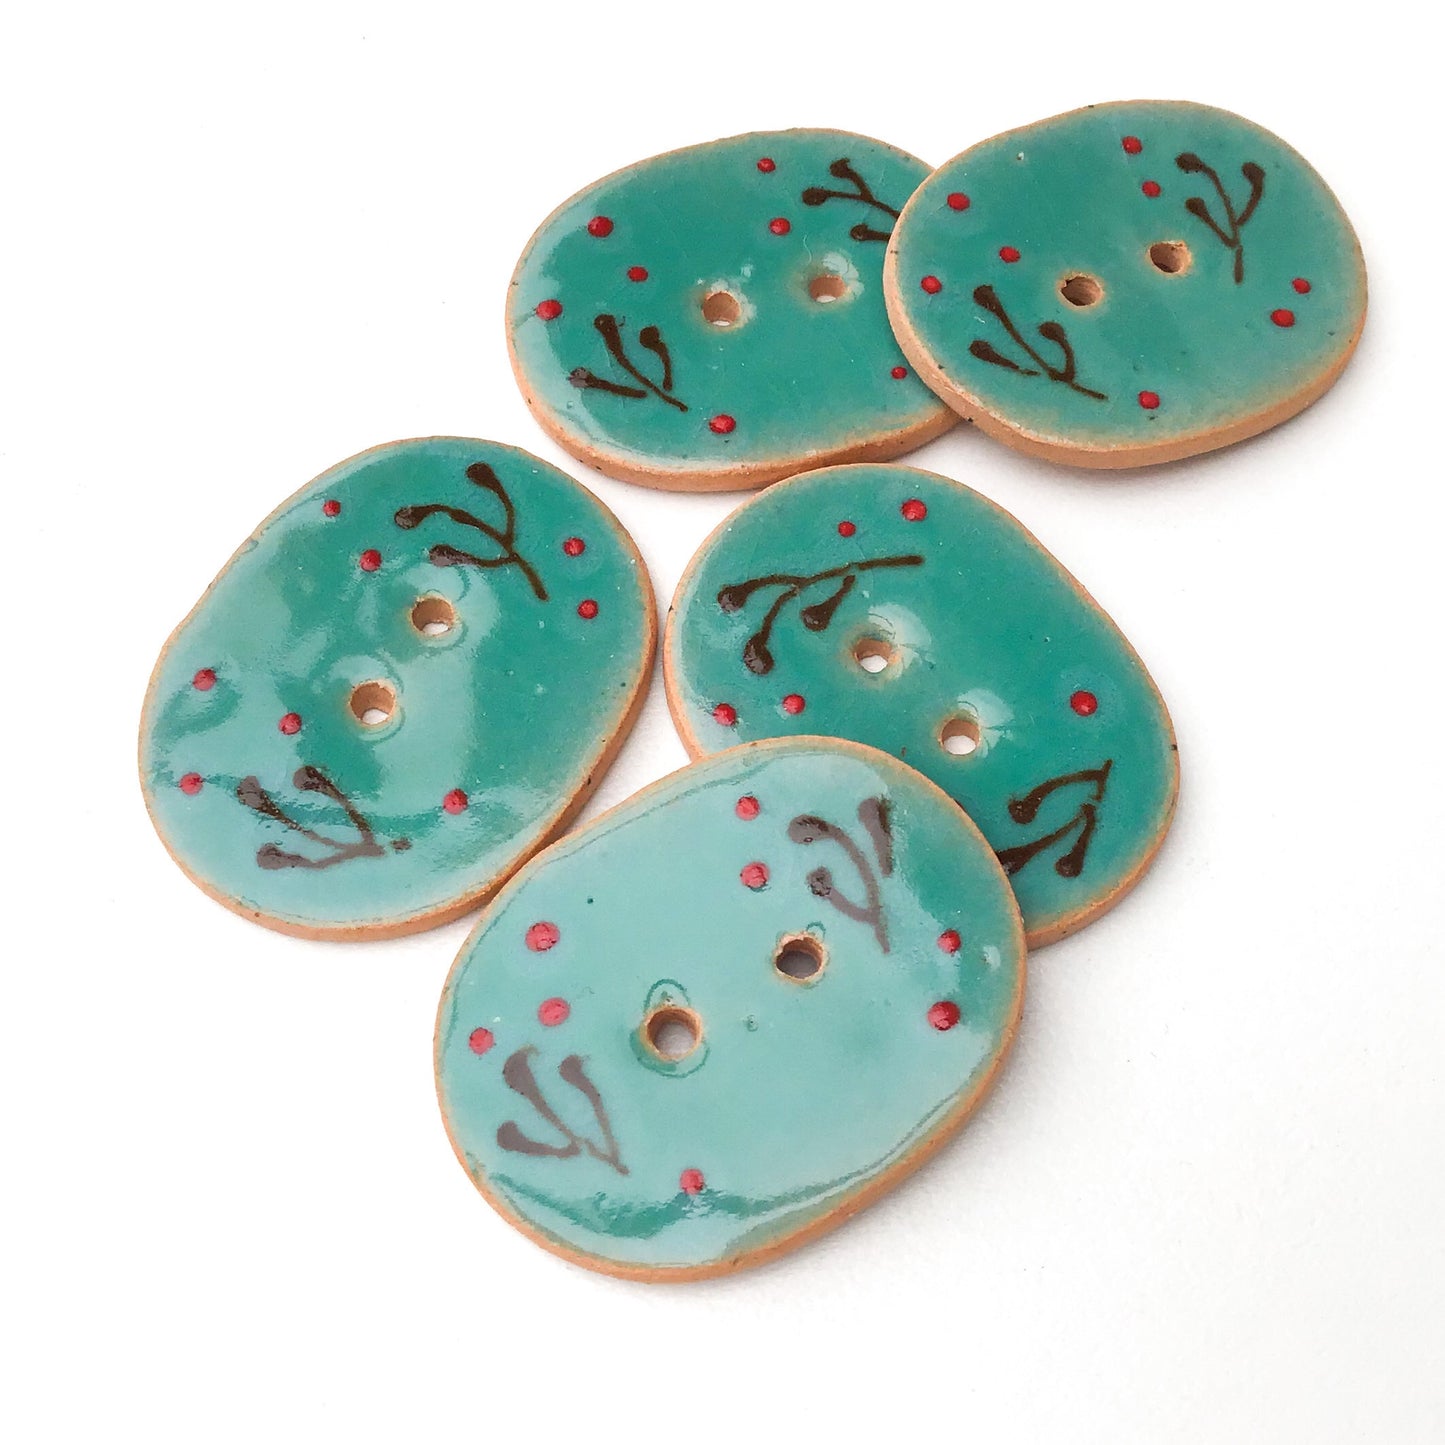 Decorative Ceramic Button with Floral Print  -Teal - Green-Blue Oval Clay Button - 1" x 1 1/4"